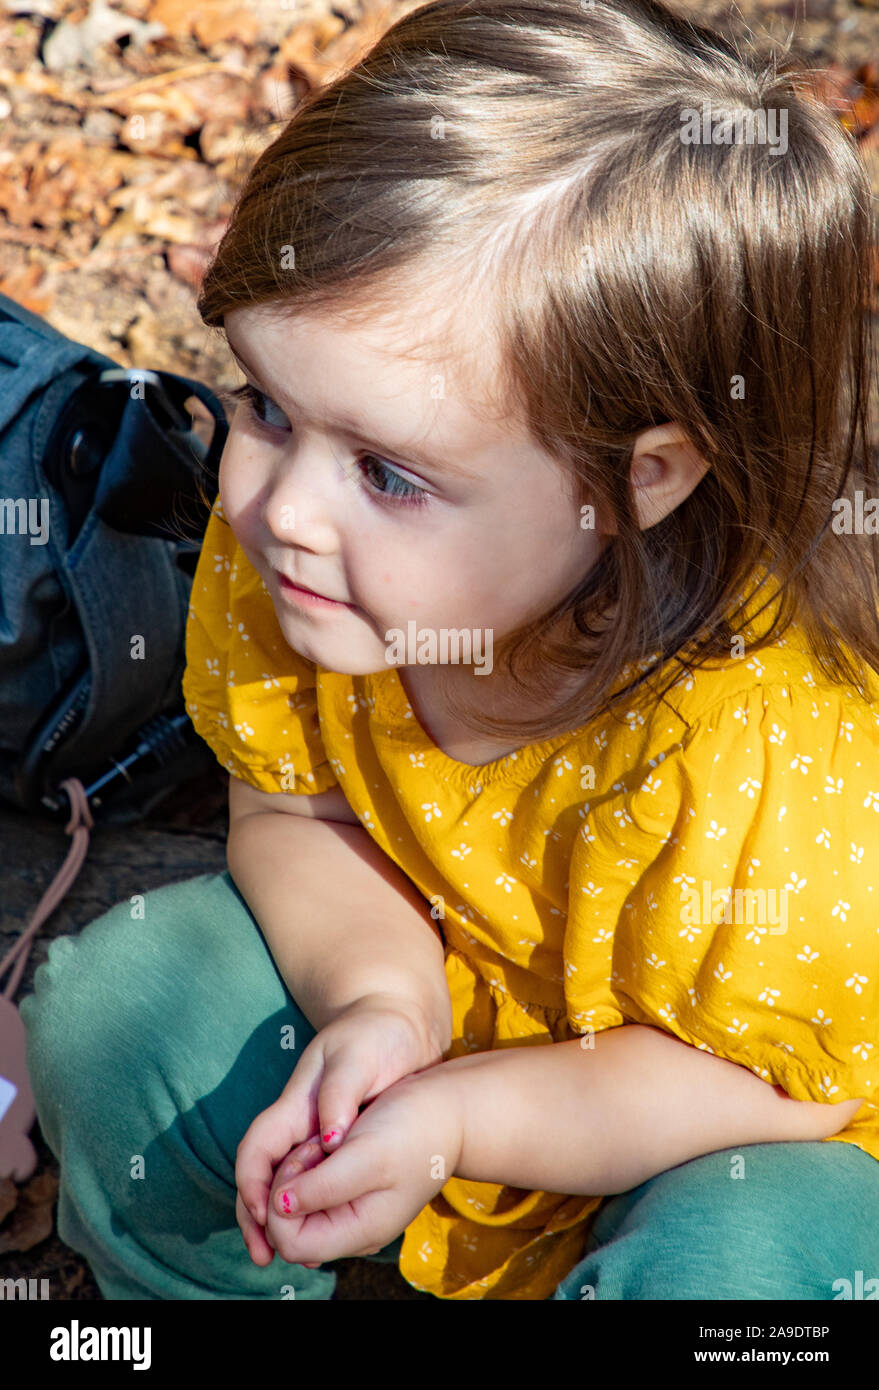 Toddler excited about what she has discovered Stock Photo